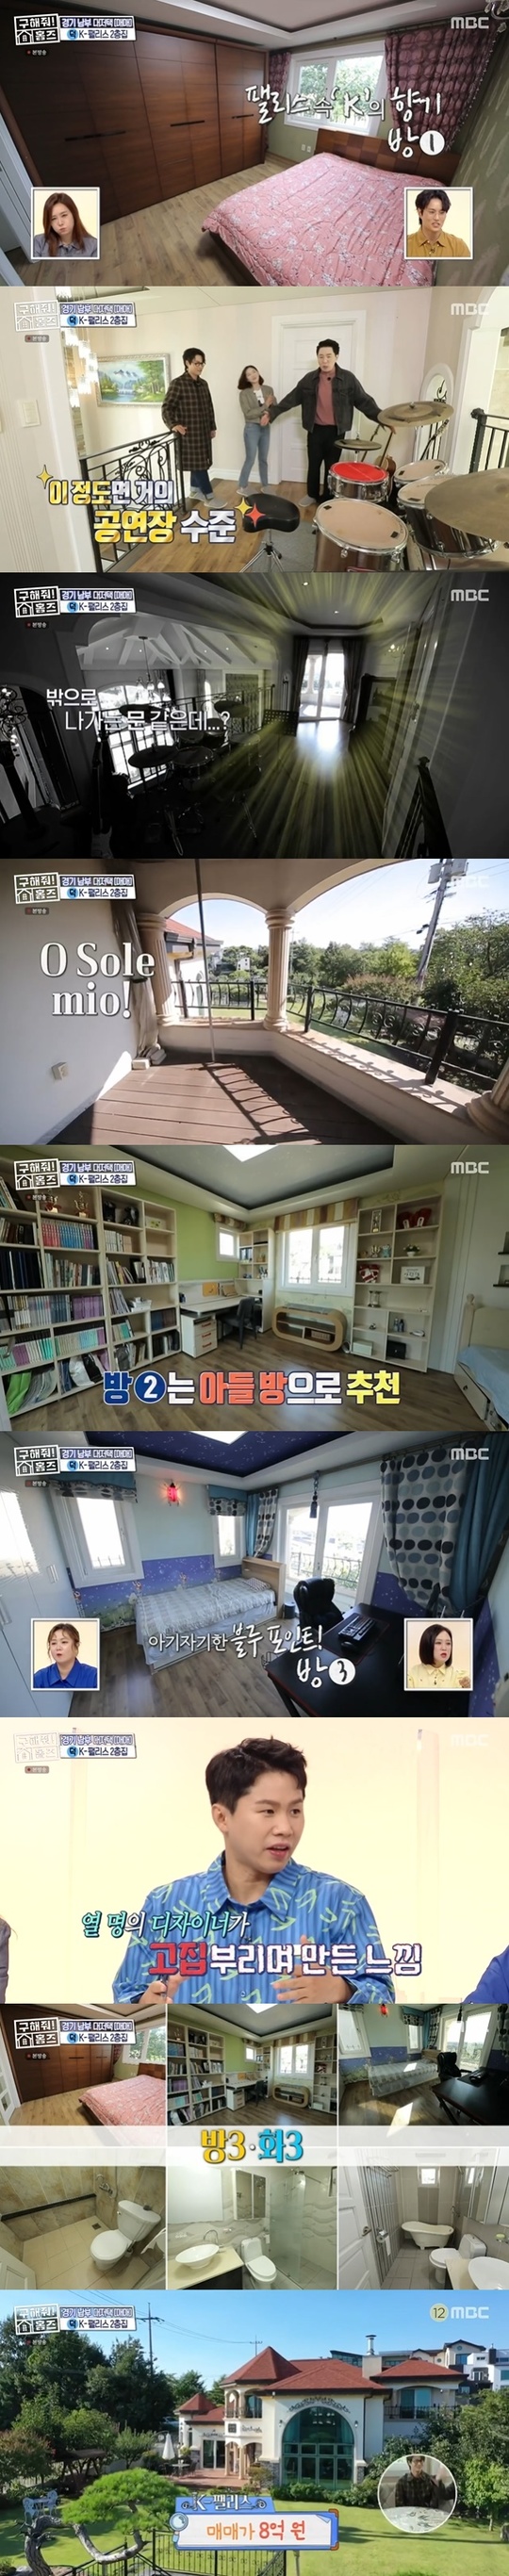 An old-fashioned, Europe-like house with a garden SONAMOO boasting 100 million was introduced.In the 126th MBC entertainment Where is My Home (hereinafter referred to as Homes) broadcast on October 3, the couple The Client, who realized the dream of a Madang house promised during their honeymoon 30 years after marriage, appeared.The Client wanted to have a townhouse with outdoor space, although it hoped for Hwaseong, Osan, Yongin and single-family houses within 40 minutes to Suwon City, where the office is located.The budget was up to 800 million won in sales.Duck Tim Boom introduced a large-scale house in Gungchori, Namyang-eup, Mars.As soon as Kim Sook saw the exterior of the house, the sale was so old-fashioned that he admired it as Pingyao feeling I saw outside Paris when I traveled to Europe backpack.The name of the house was K-Palace House.Madangs landscaping was also unusual; the boom pointed to the SONAMOO planted on the other hand, saying, SONAMOO prices are too high, whispering that the price is 100 million.However, the SONAMOO will be taken by the current landlord, and instead, all the remaining landscaping, including the expensive Baek Il Hong, was a basic option.Even if I entered the house, it continued to be resilient. The living room, which boasts a height of 5.6m, was surprisingly overwhelming, saying that even the expert Lim Sung-bin was a palace.The kitchen was eye-catching with a window-sheeted Europe-style car room, which looked like a wallpaper and floorpaper replacement on the first floor, but was ample in size.Then, on the second floor, a balcony in the garden view that did not require an earnings was found. On the second floor, there were two more rooms of good size.